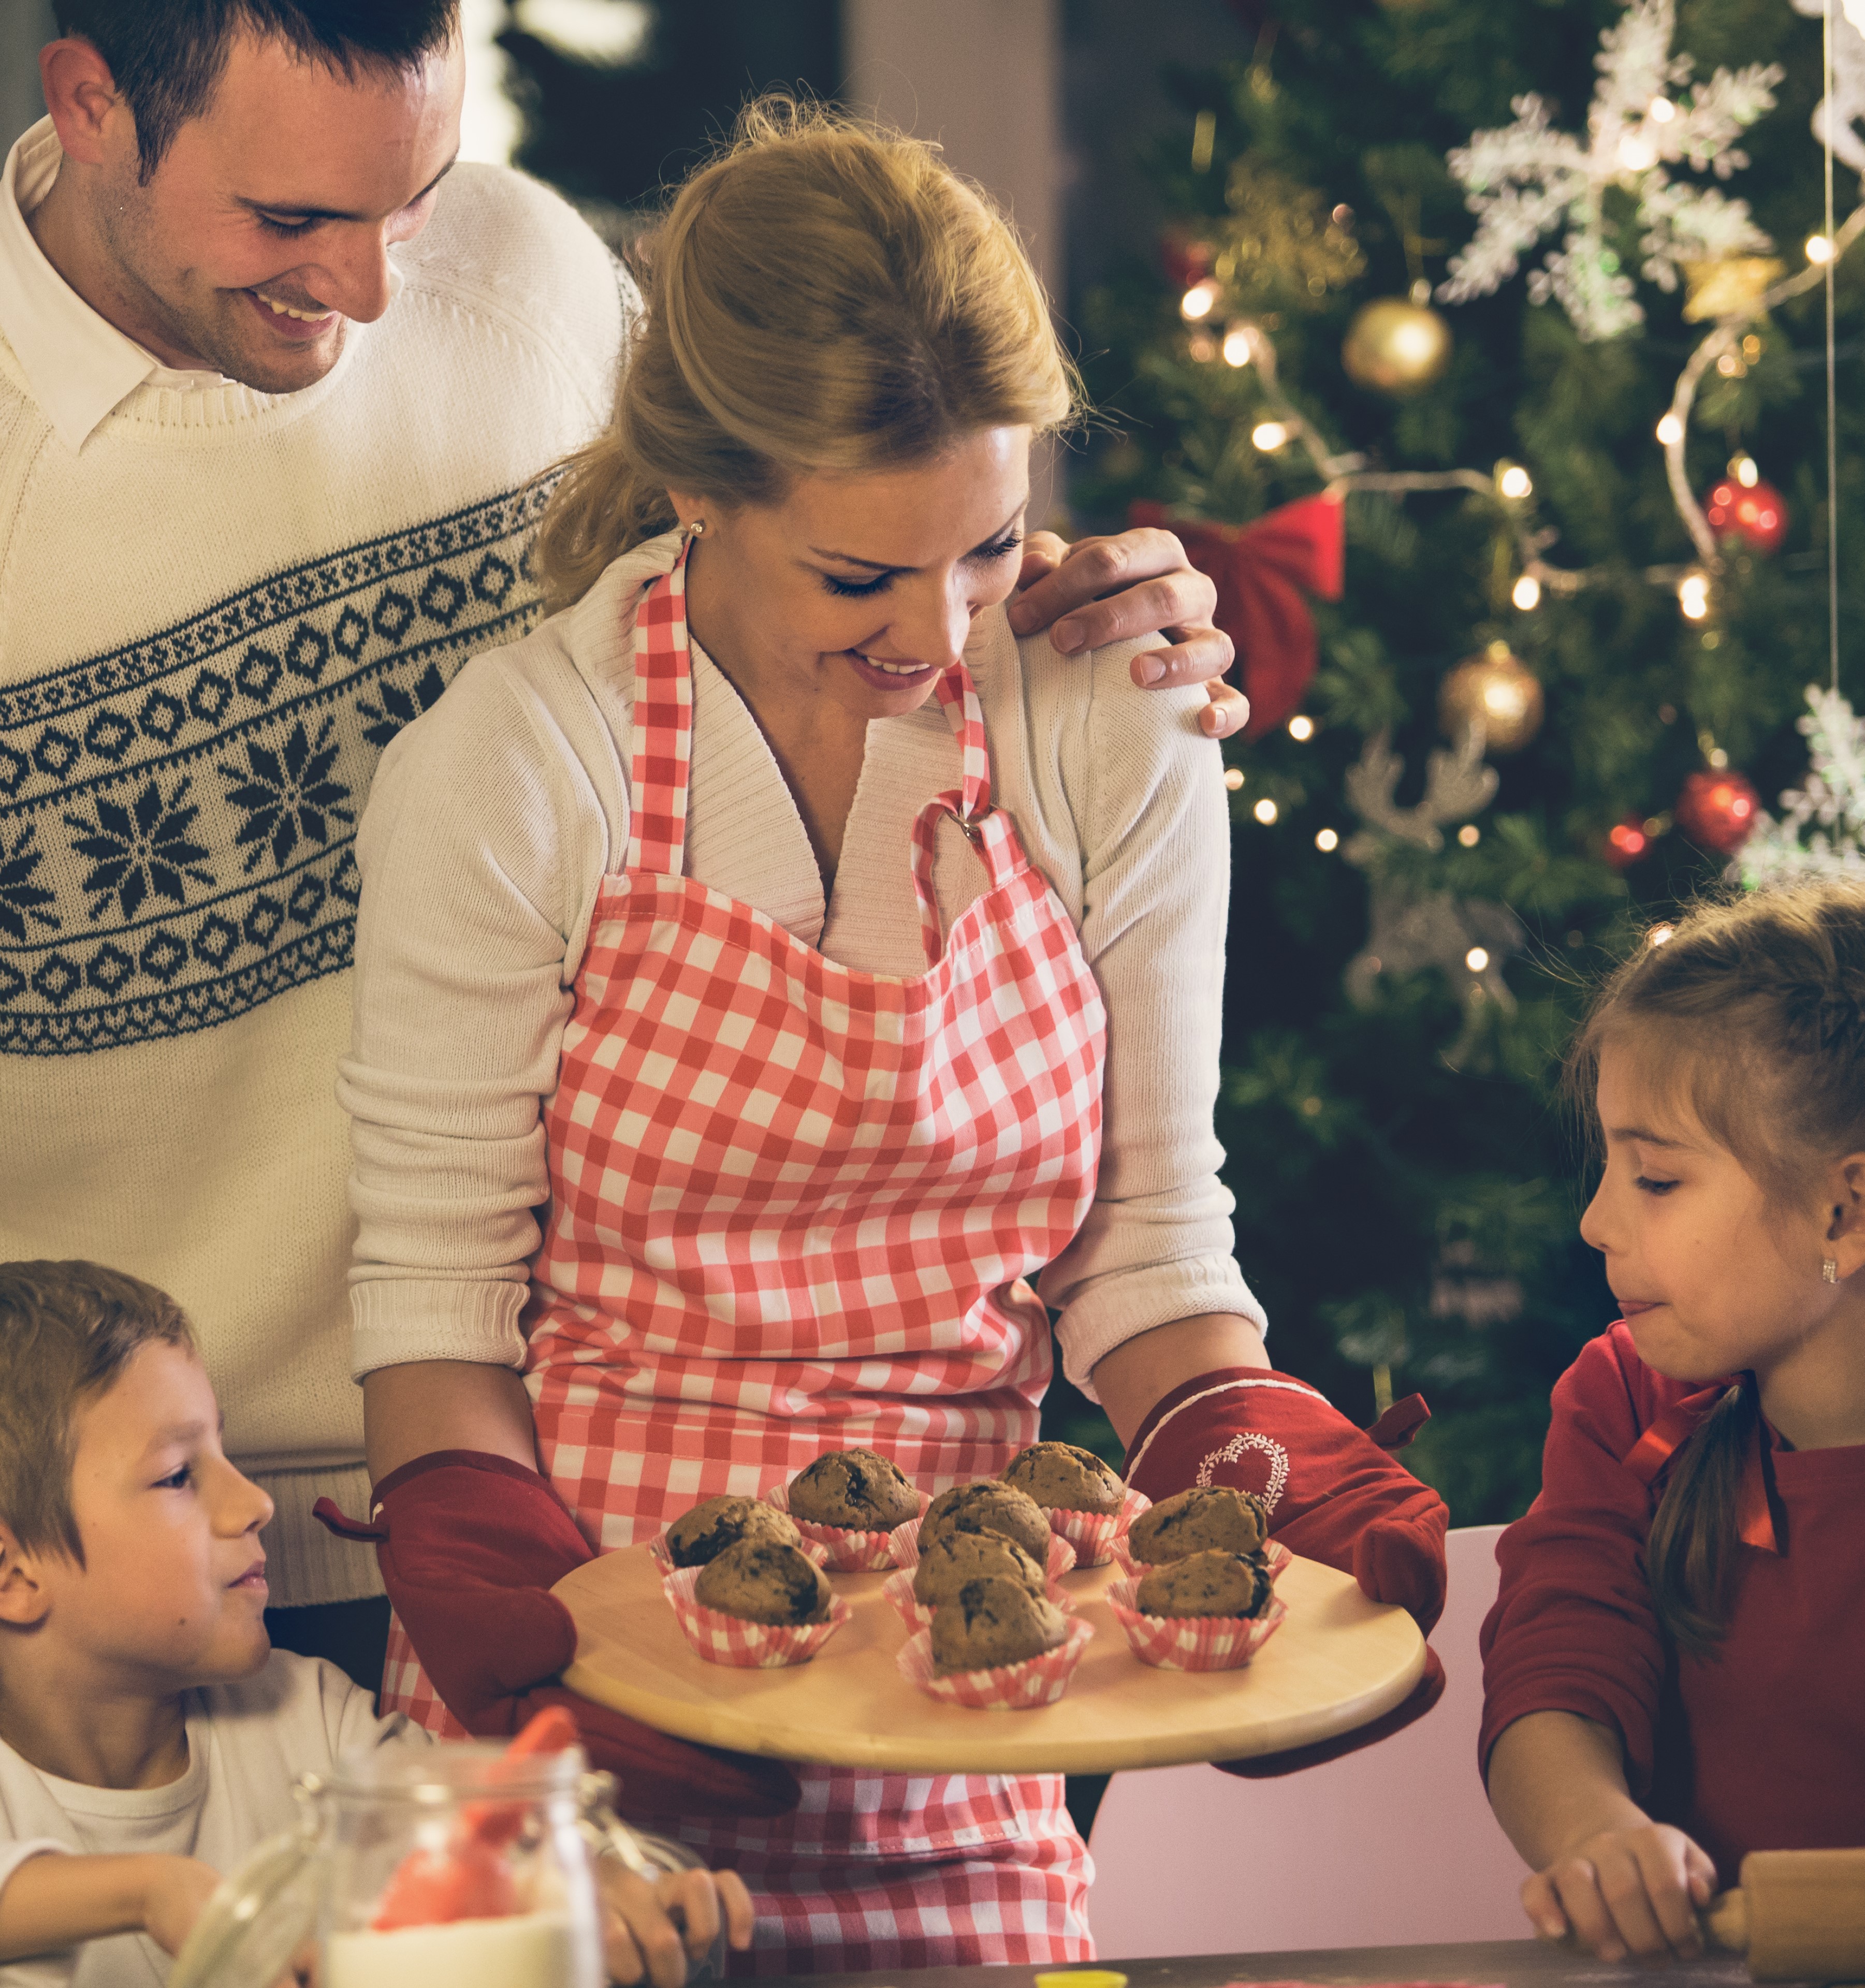 A man embraces his wife as she holds a tray of healthy holiday muffins for their children in front of a decorated Christmas tree.